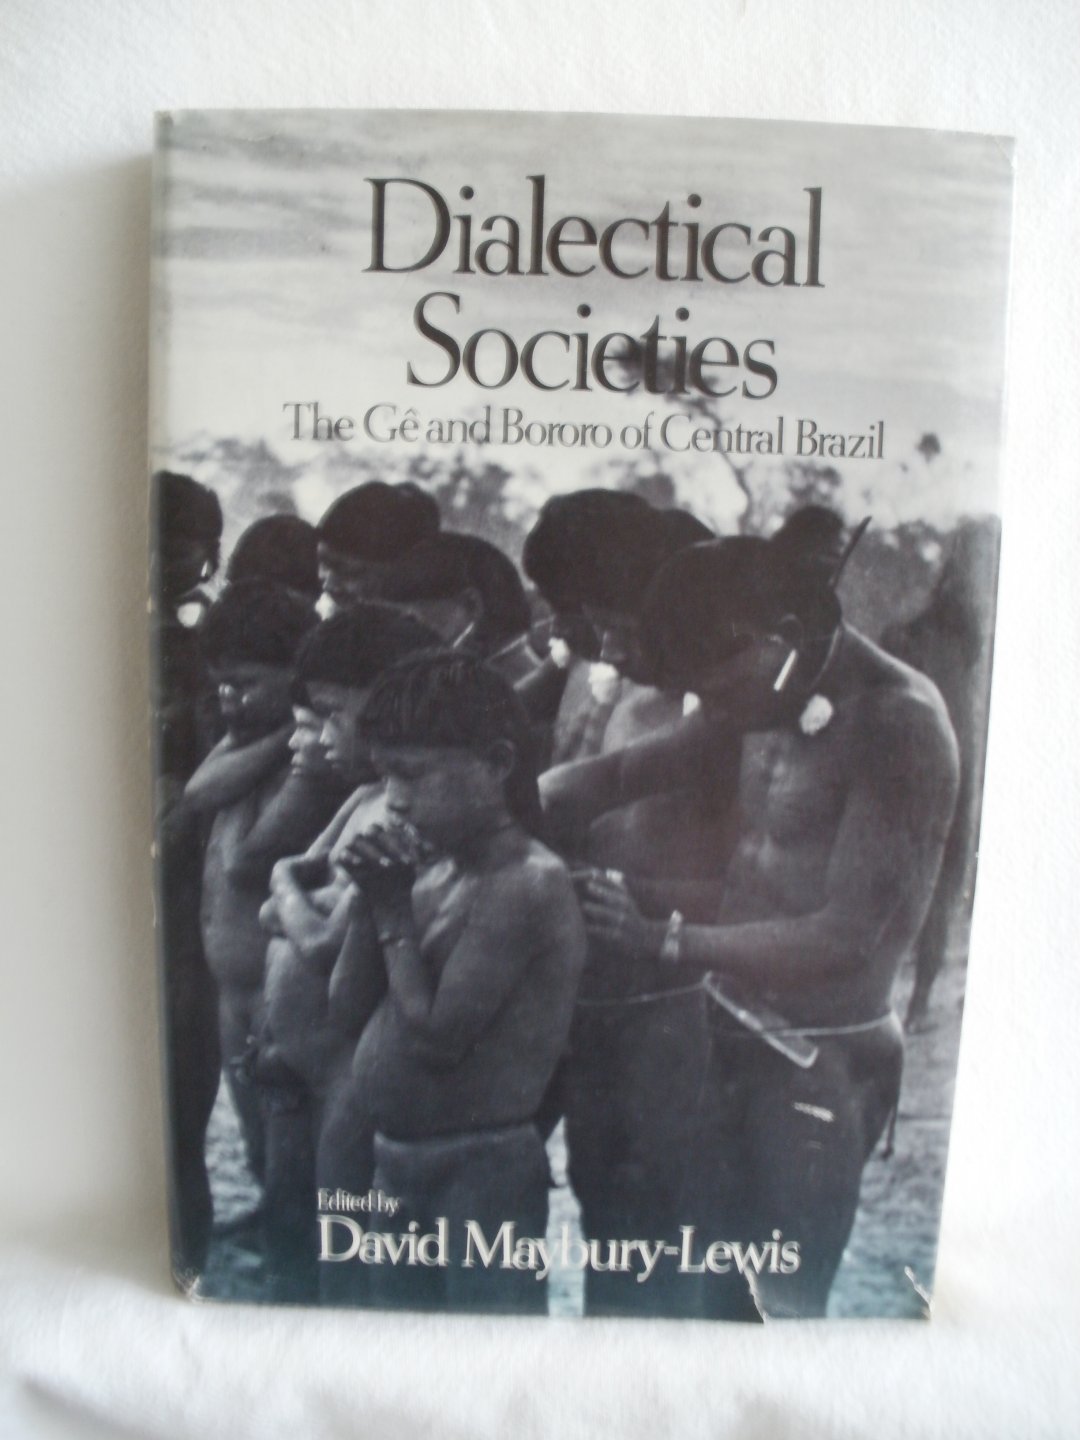 Maybury-Lewis, David (ed.) - Dialectical Societies. The Ge and Bororo of Central Brazil. Harvard Studies in Cultural Anthropology, no.1.